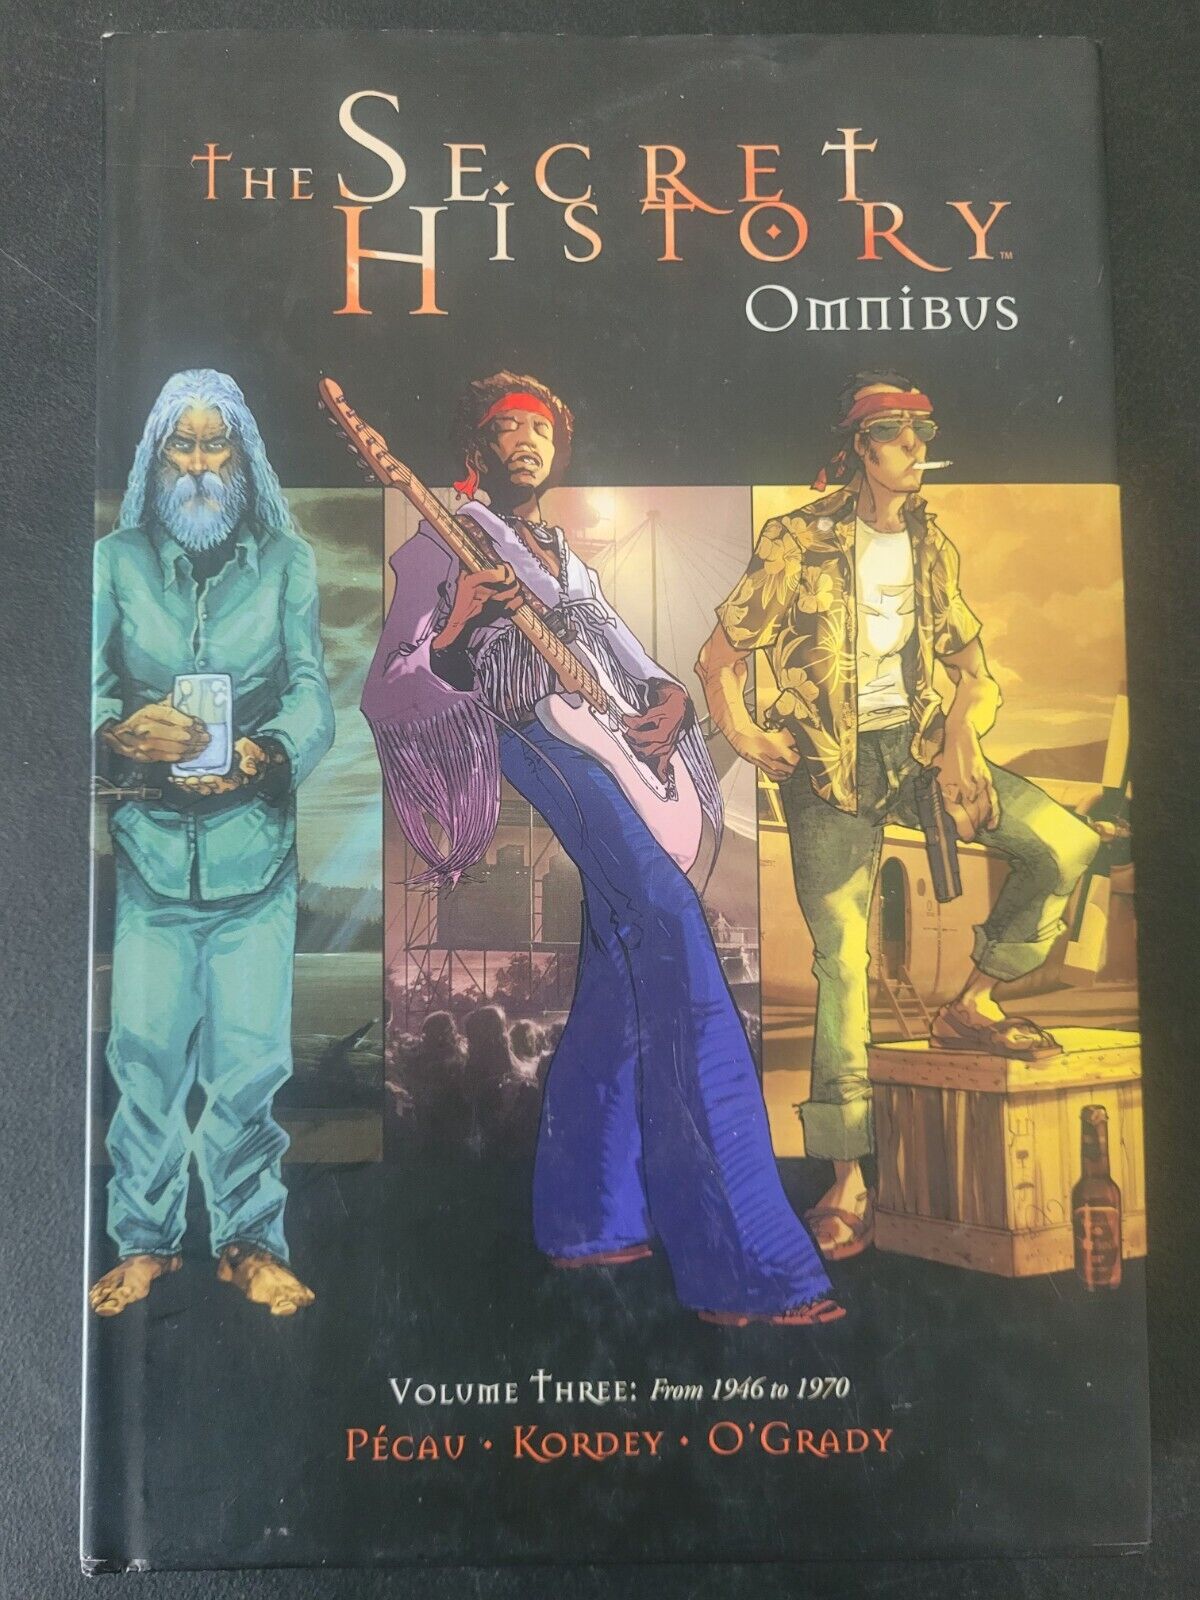 THE SECRET HISTORY OMNIBUS HARDCOVER Volume 3 From 1946 to 1970 ARCHAIA 2014